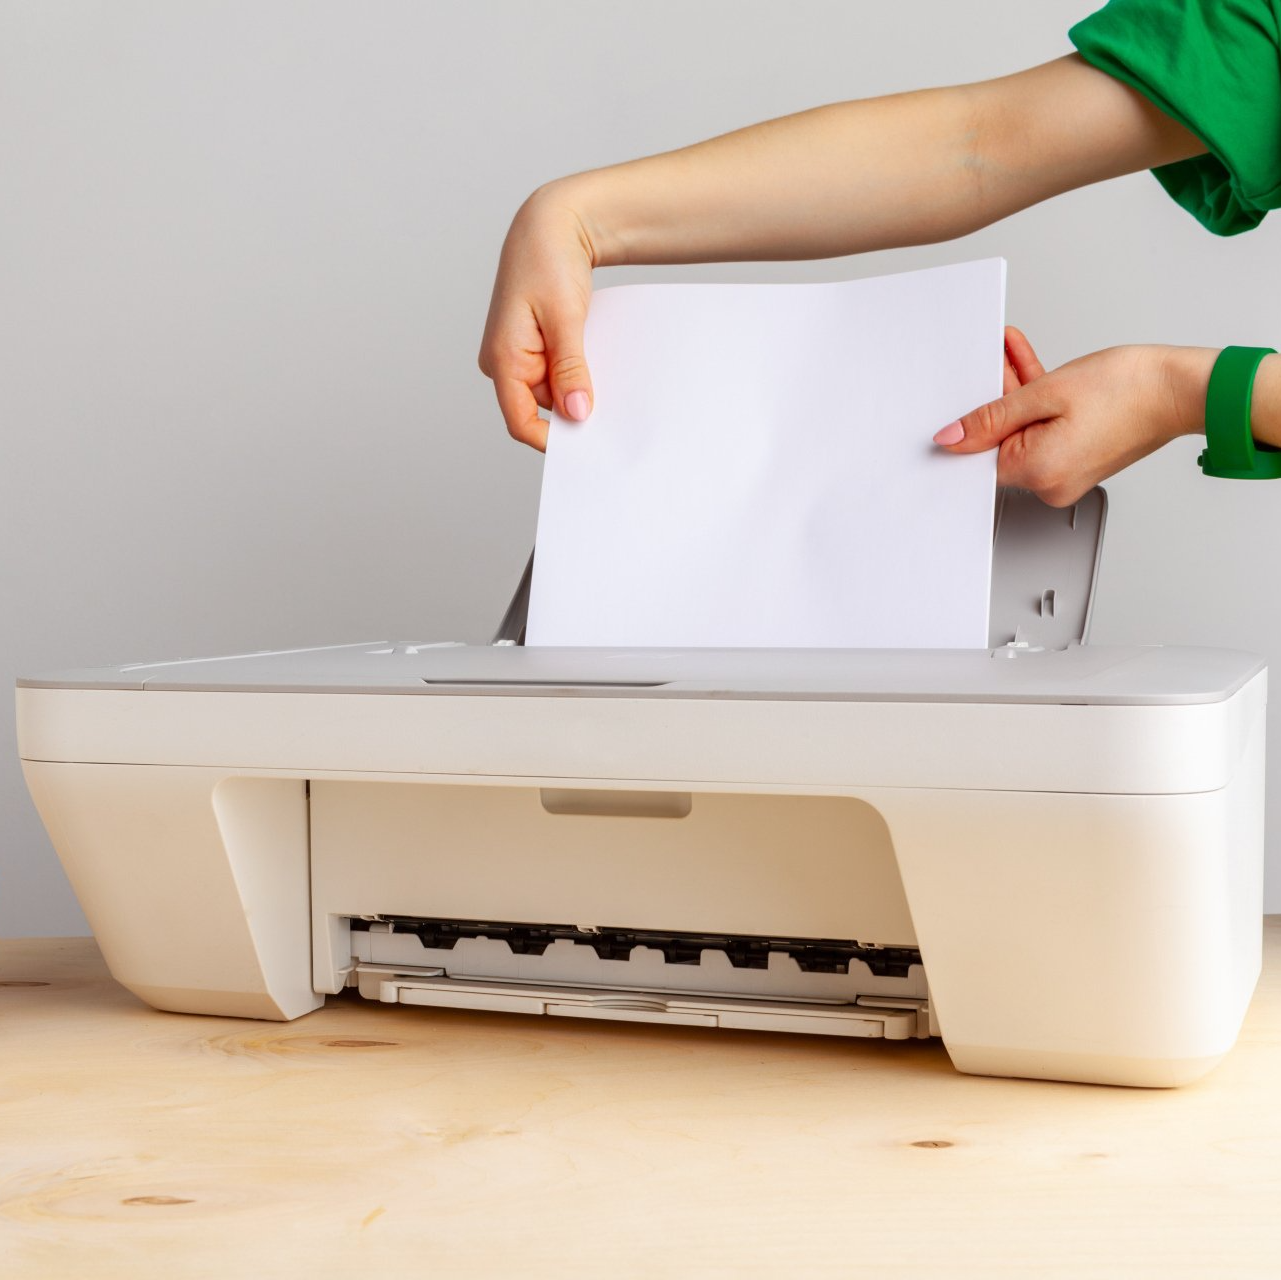 woman loading piece of paper into epson printer